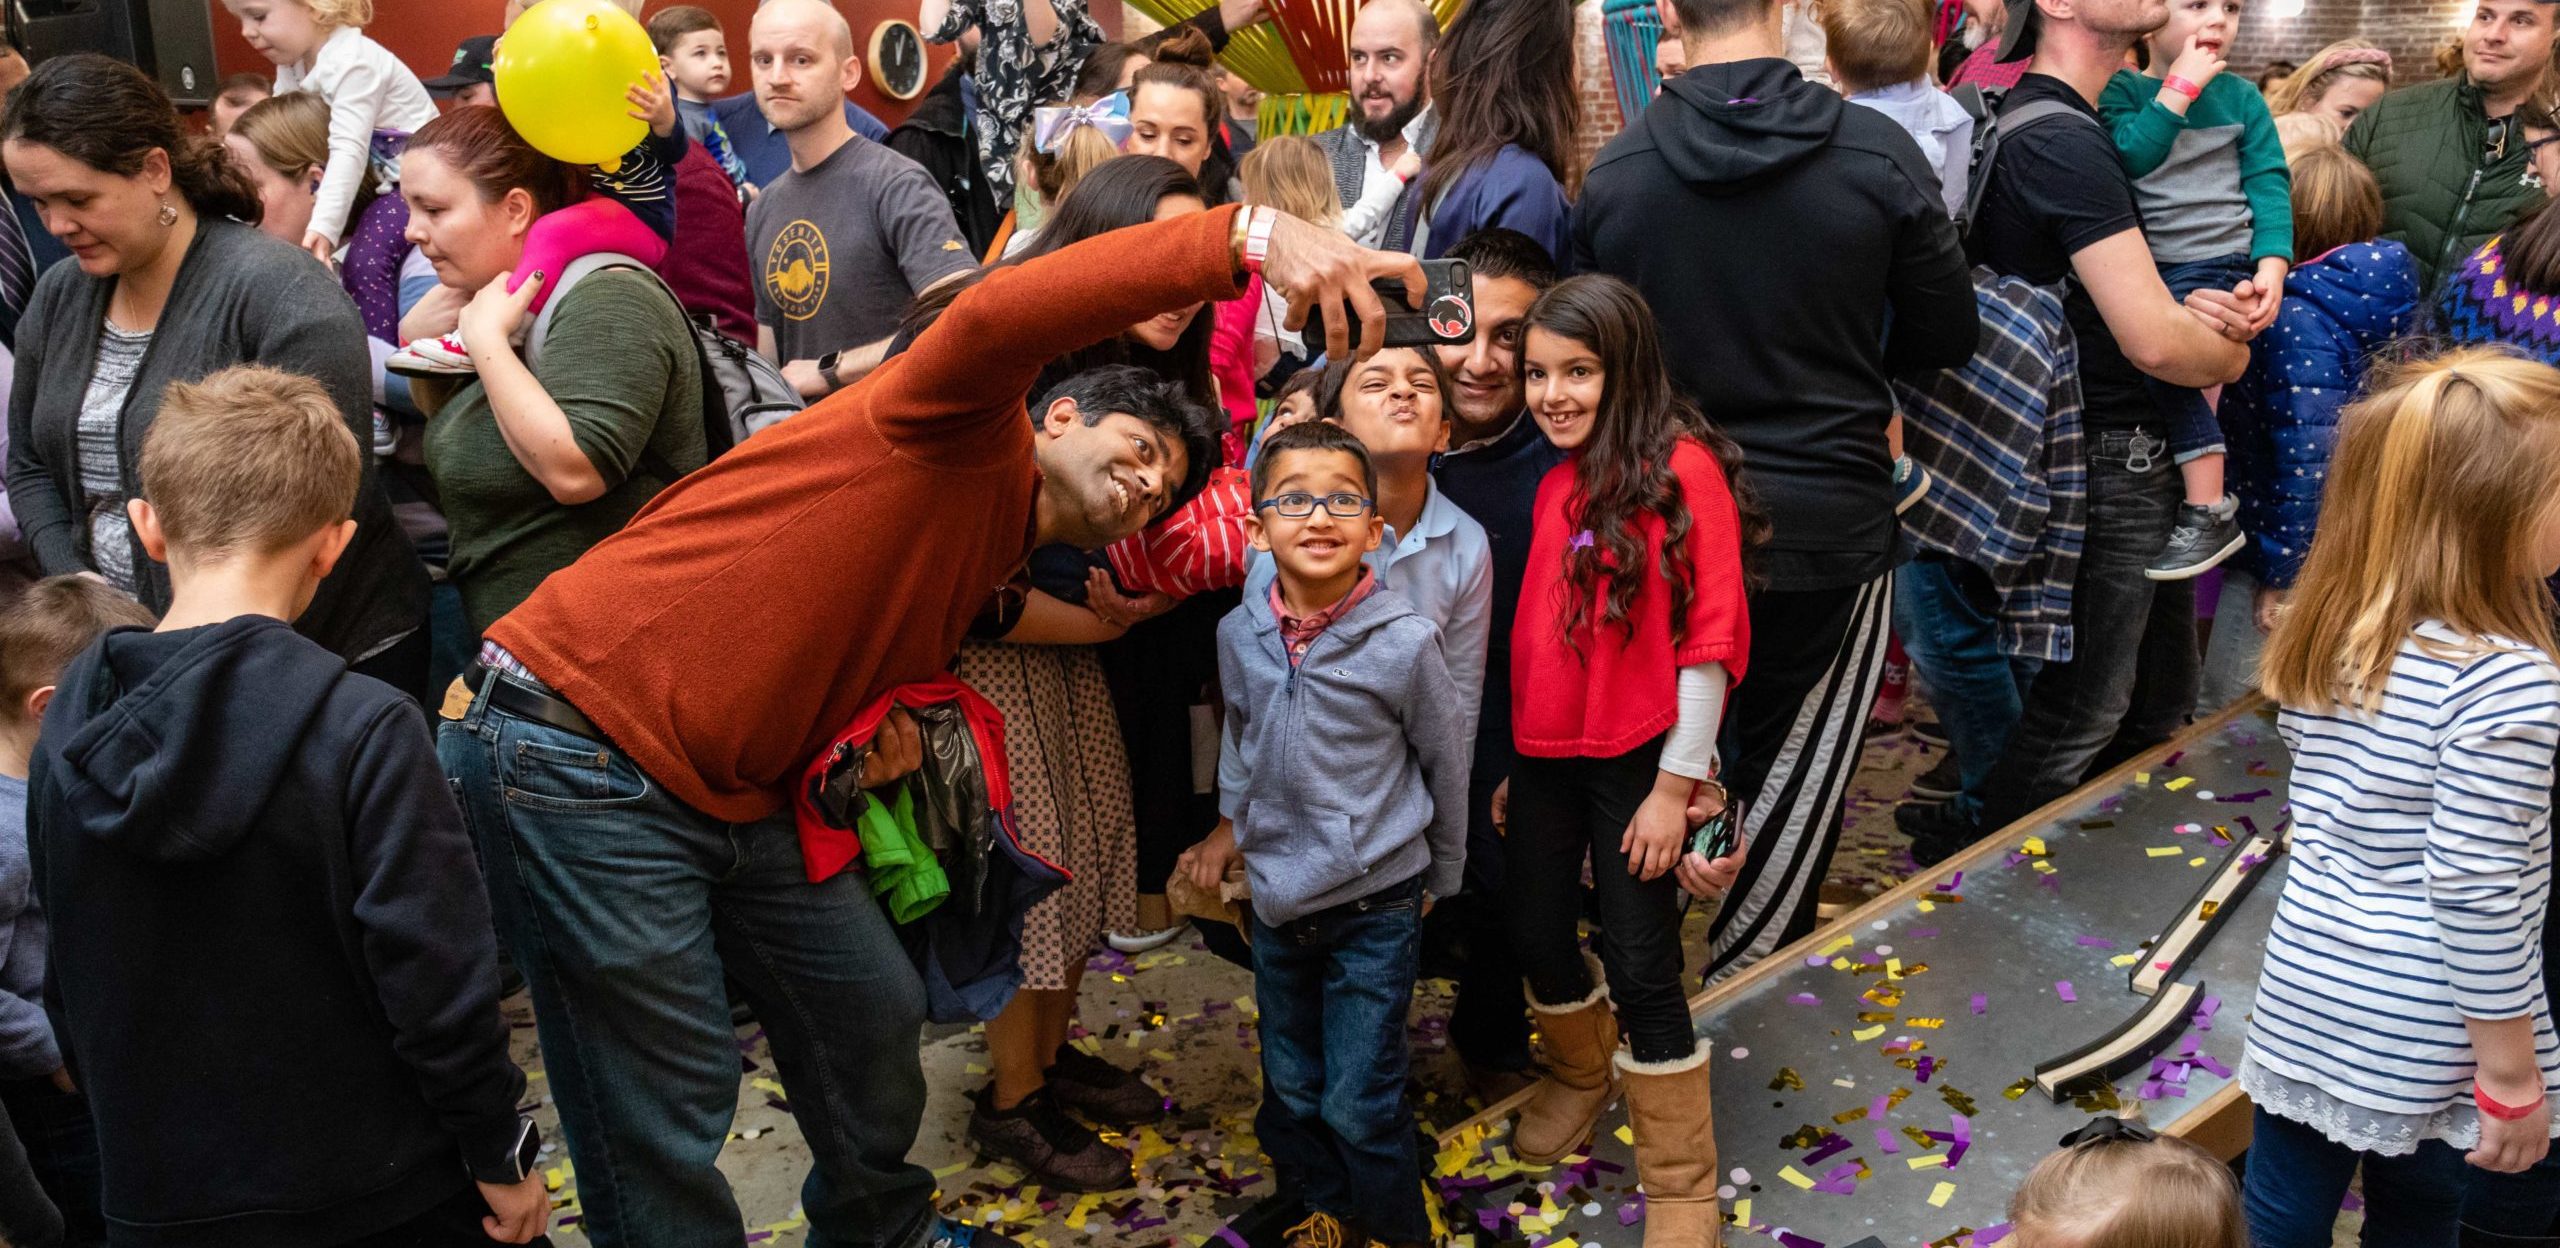 family taking a selfie in Garage exhibit with crowd behind them and remnants of new year's confetti on the ground